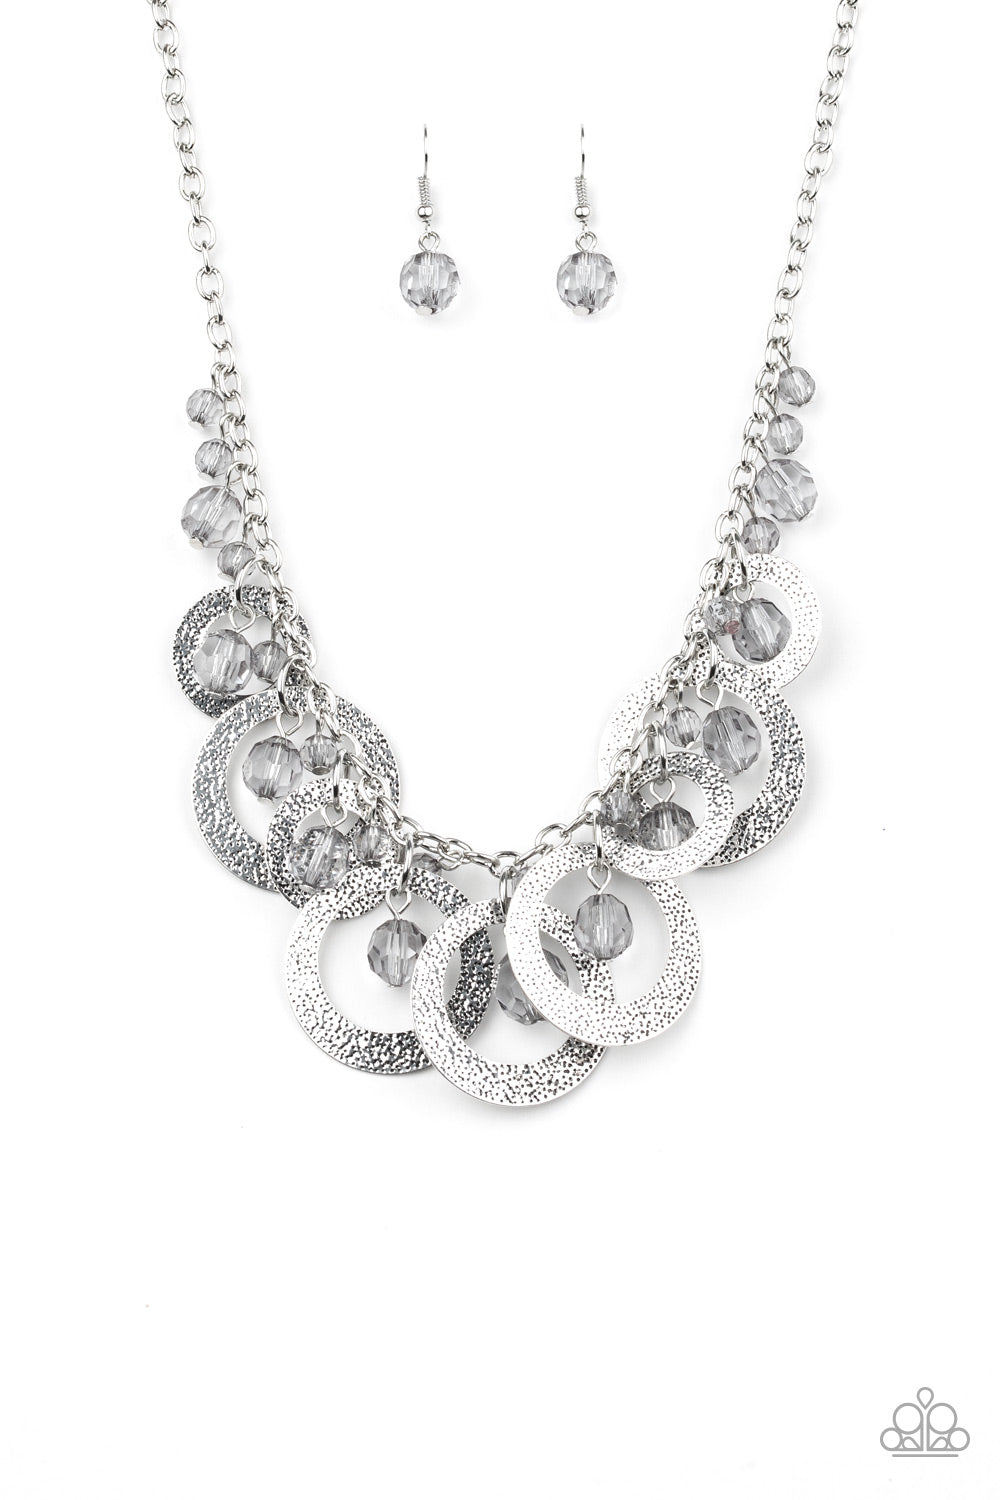 Turn It Up - Silver Necklace Set